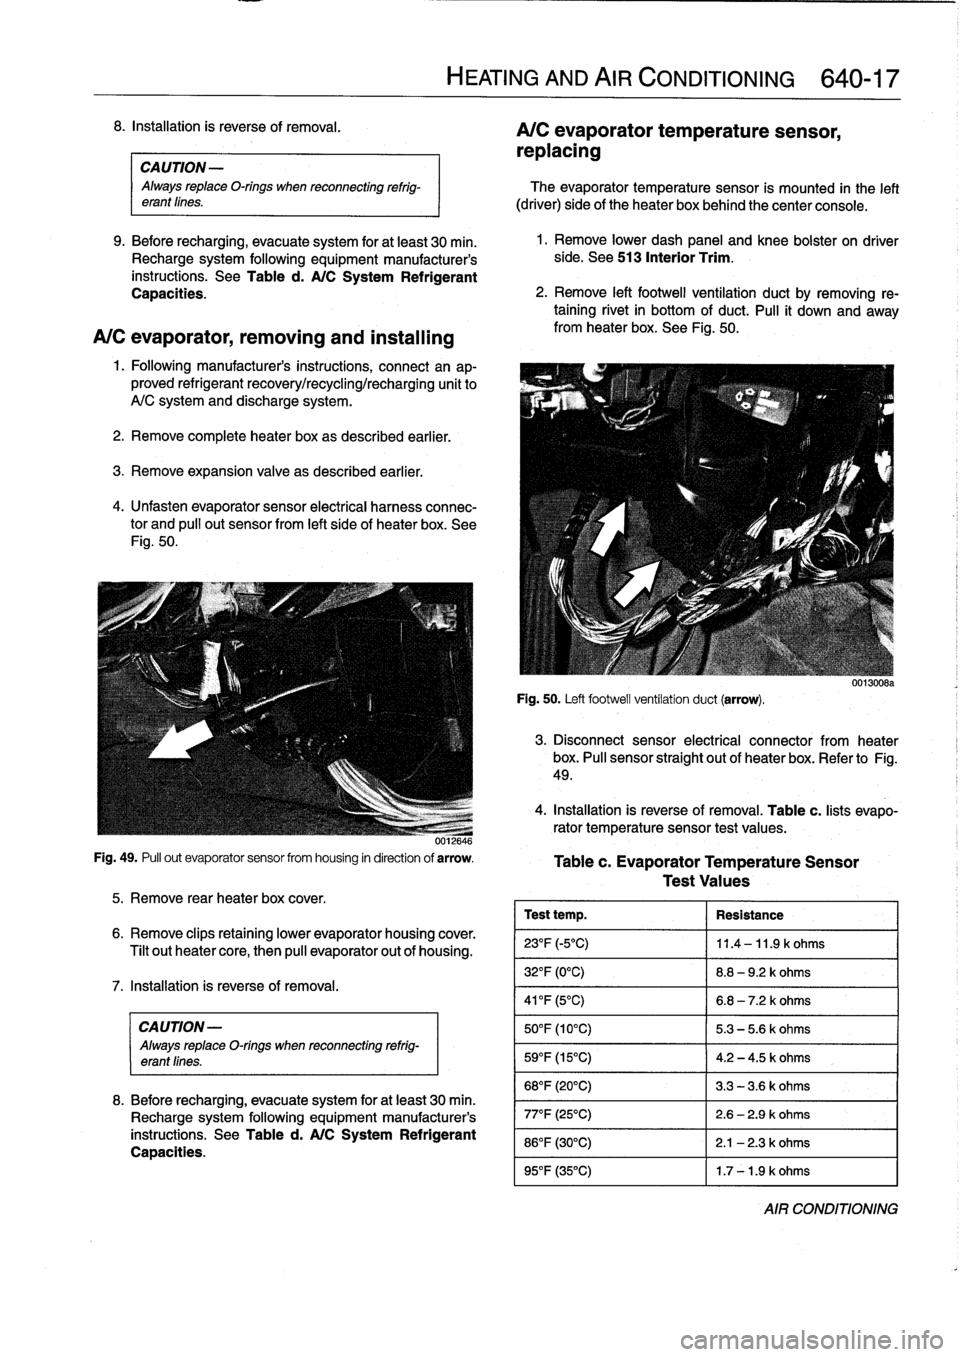 BMW M3 1994 E36 Owners Manual 
CAUTION
-

Always
replace
O-rings
when
reconnecting
refrig-
erant
fines
.

9
.
Before
recharging,
evacuate
system
for
at
least
30
min
.
Recharge
system
following
equipment
manufacturers
instructions